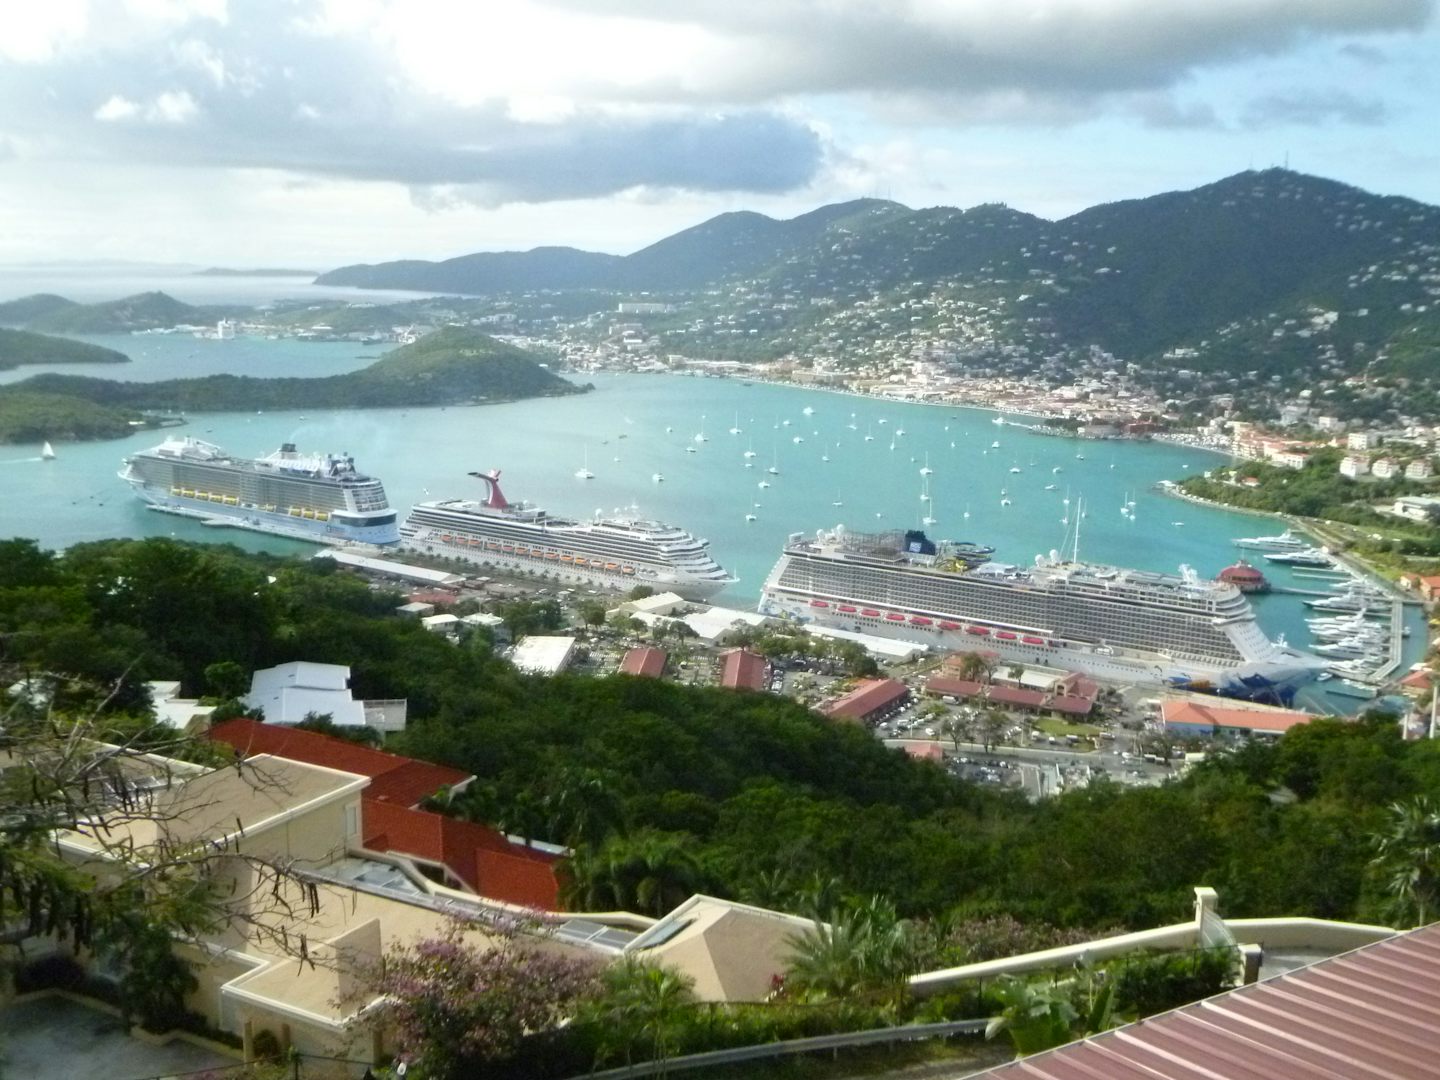 View from the top of the Tram at St. Thomas overlooking the port